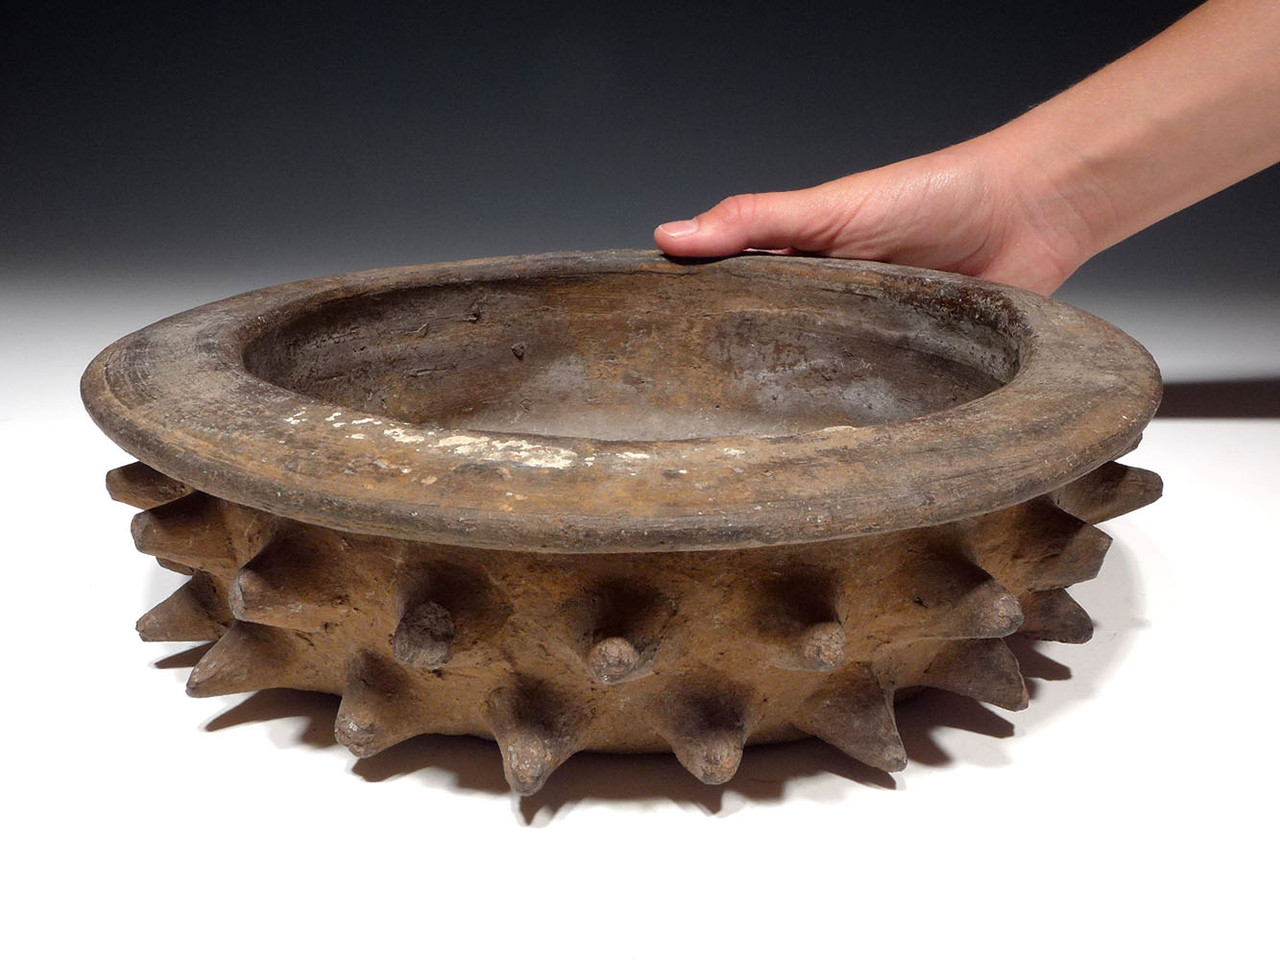 UNBROKEN LARGE MAYAN CEREMONIAL SPIKE DISH BOWL POTTERY WITH CEIBA TREE THORN DESIGN *PCX850